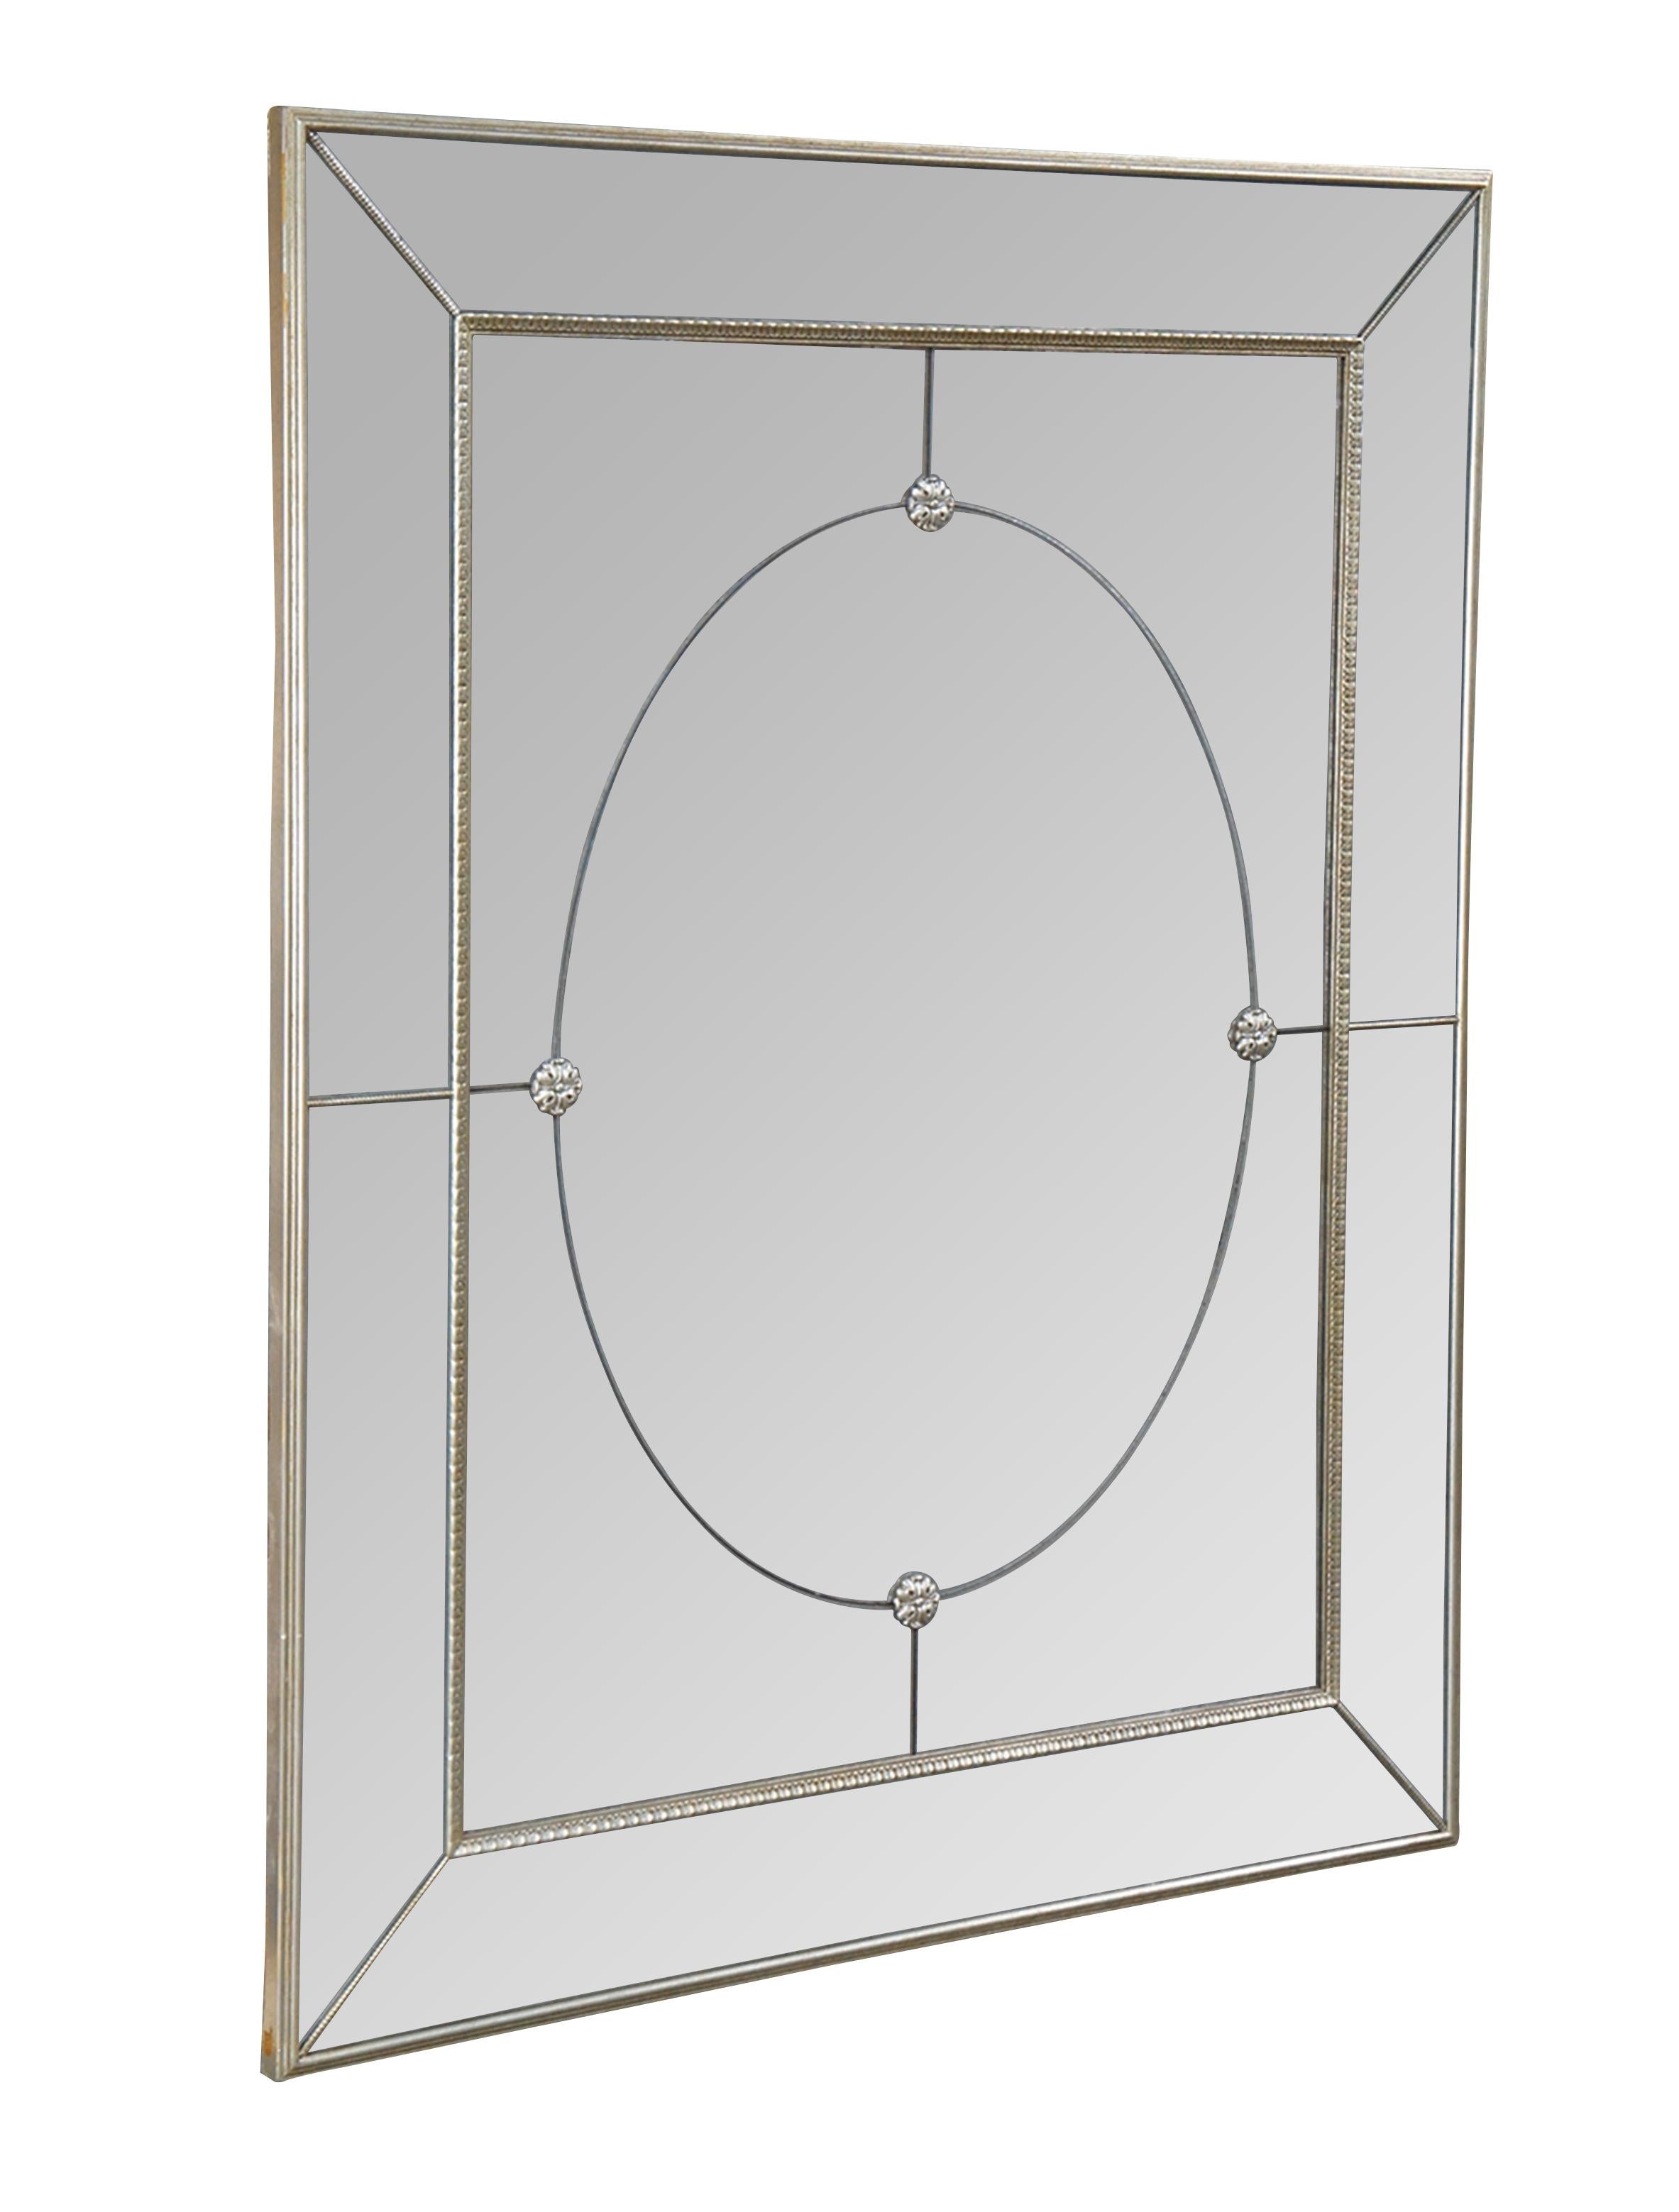 Vintage wall, hall, vanity or overmantel mirror featuring Venetian styling with antiqued hazy glass and silver medallion accents.  Made in Canada.

Dimensions:
47